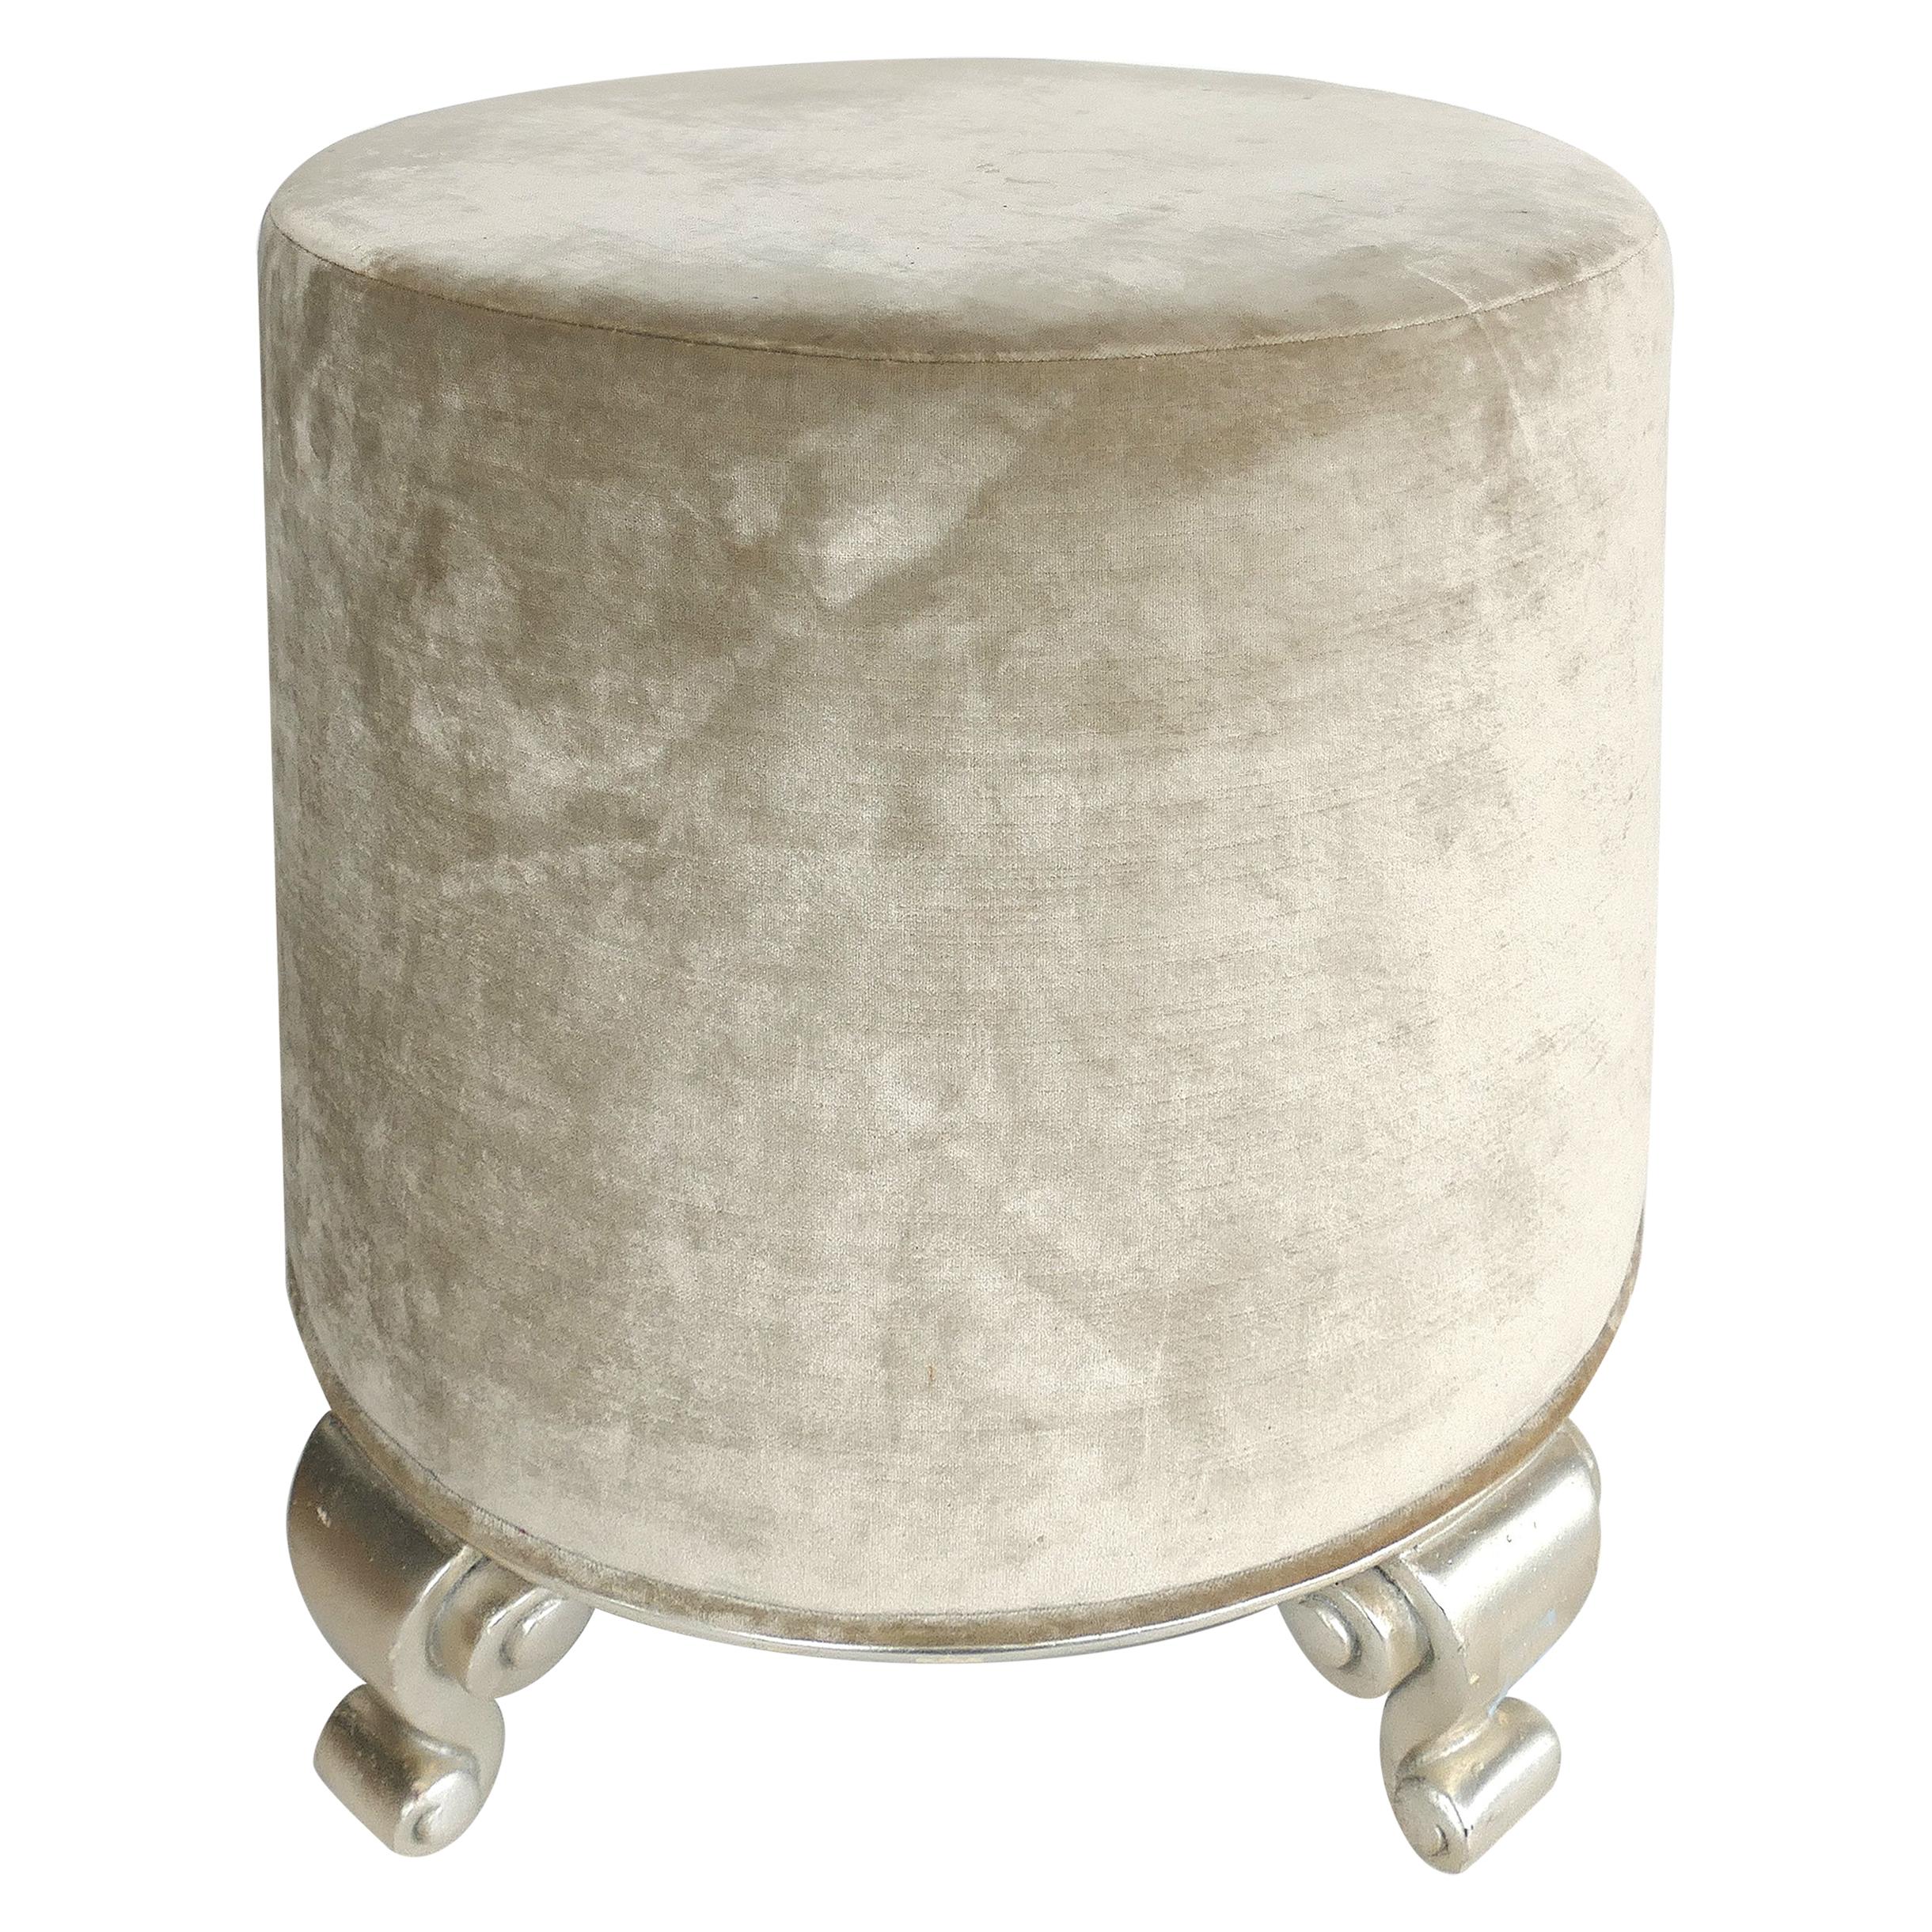 Christopher Guy Pouf Stool, Carved Wood and Silvered Feet